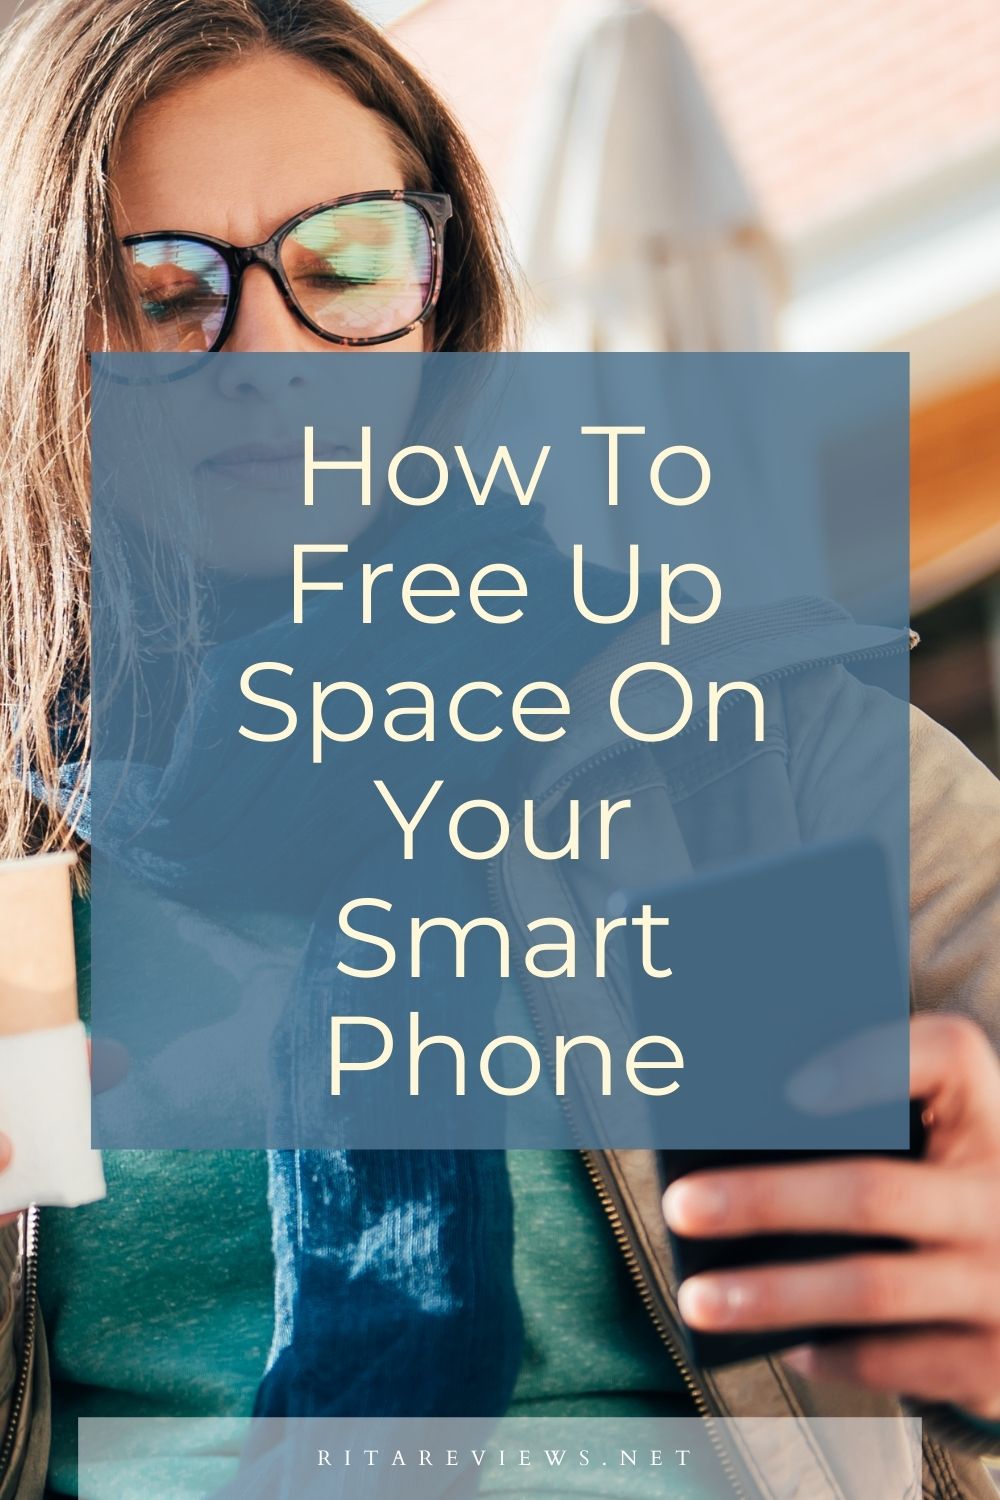 How To Free Up Space On Your Smart Phone